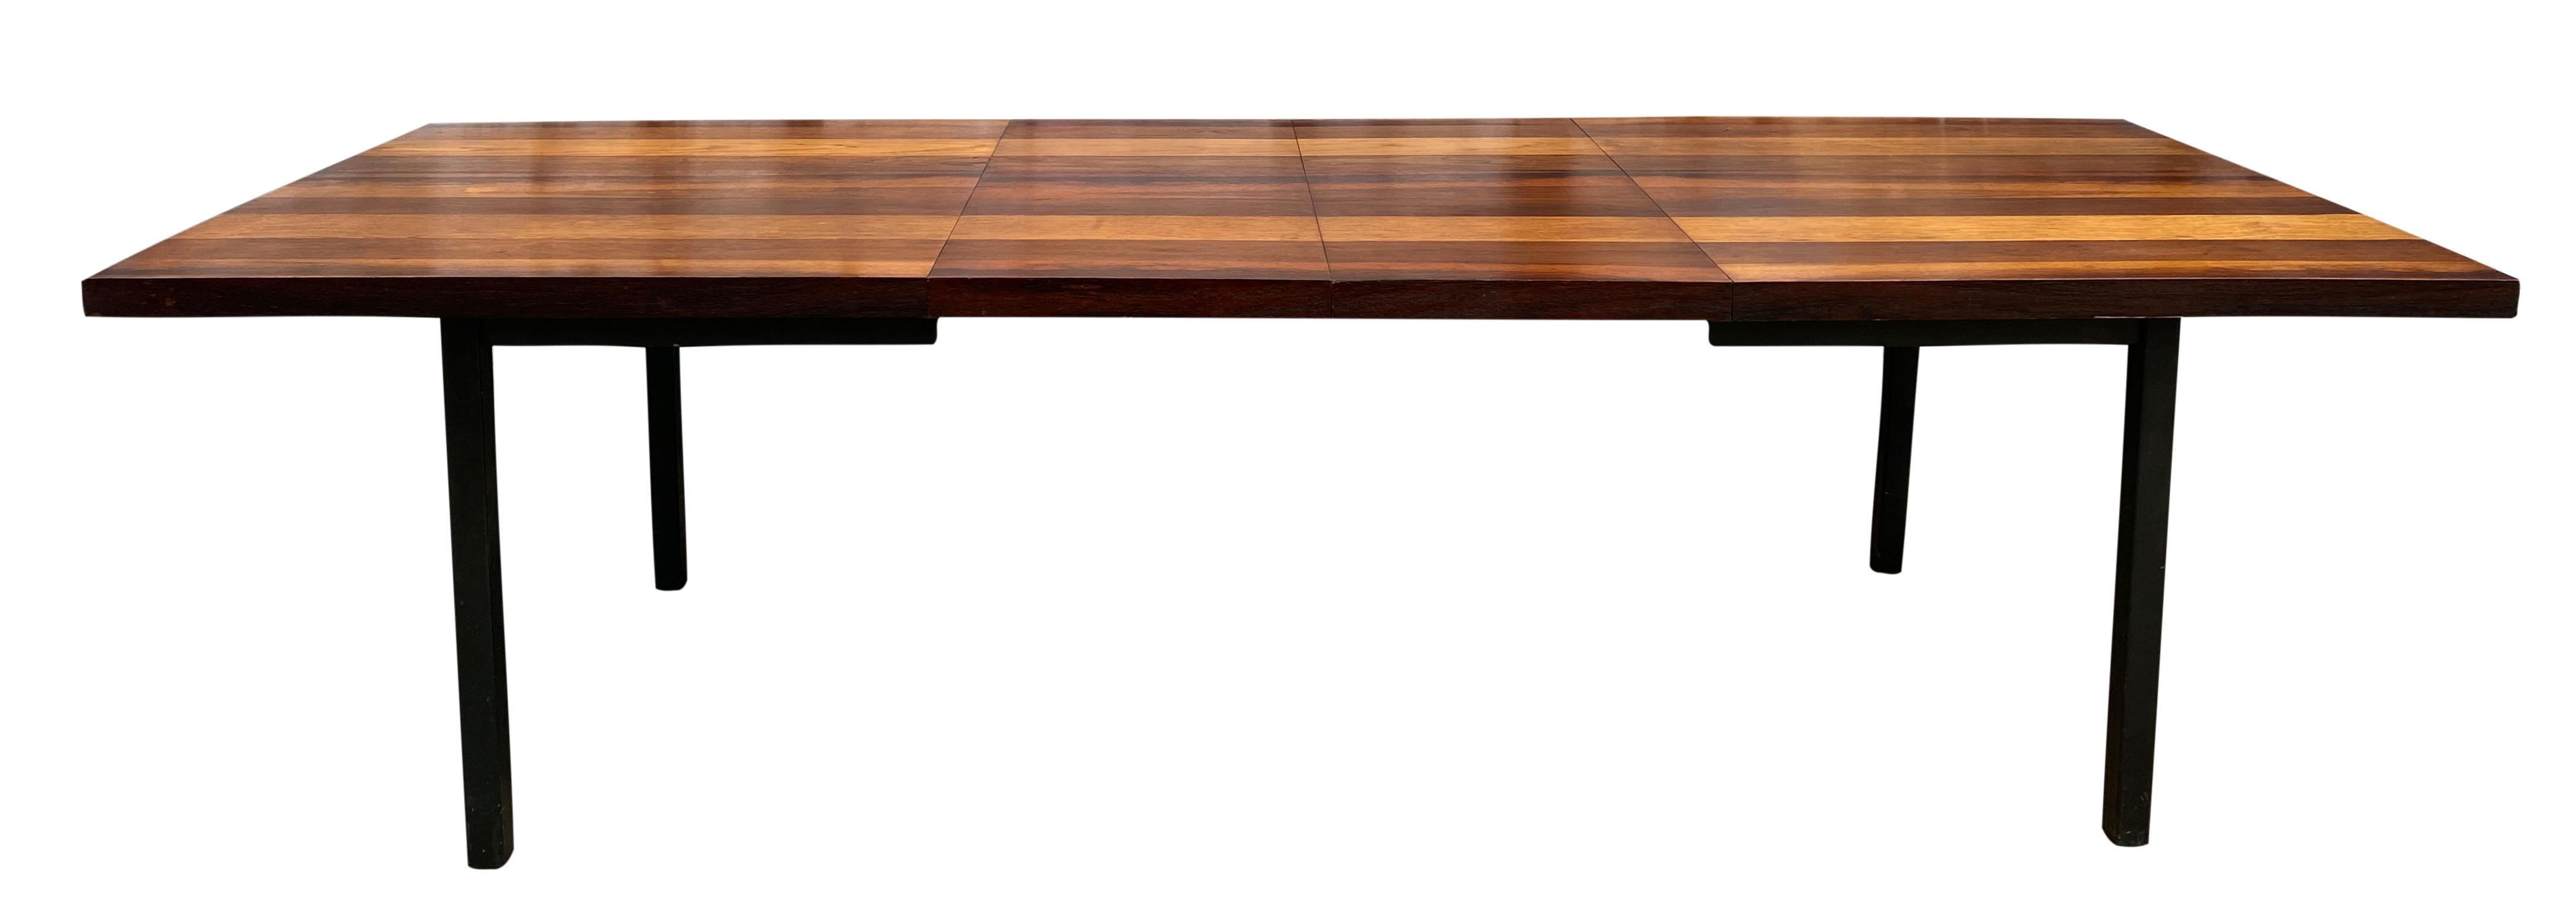 Mid-20th Century Midcentury Tri-Wood Expandable Dining Table by Milo Baughman with '2' Leaves